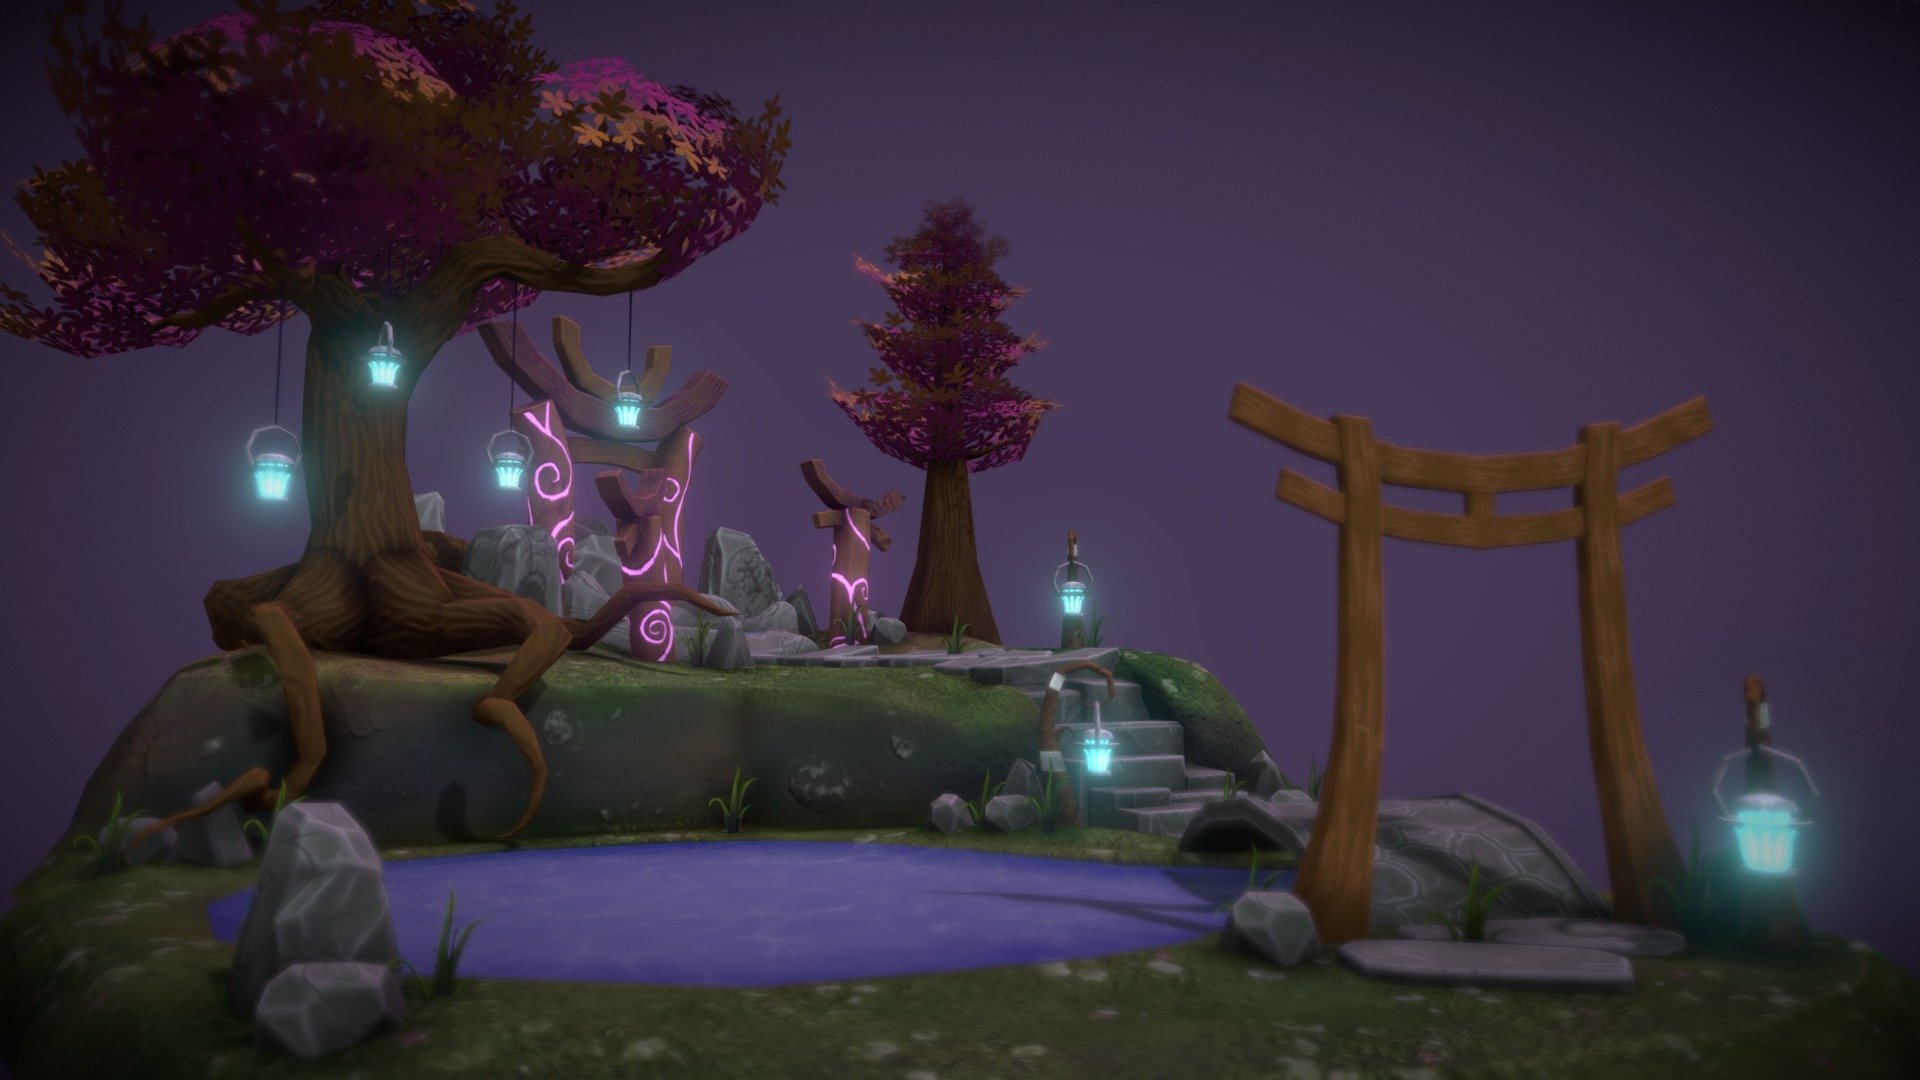 A diorama inspired by the moonwell in World of Warcraft - World of Warcraft Moonwell Diorama - 3D model by AliyahJawad 3d model